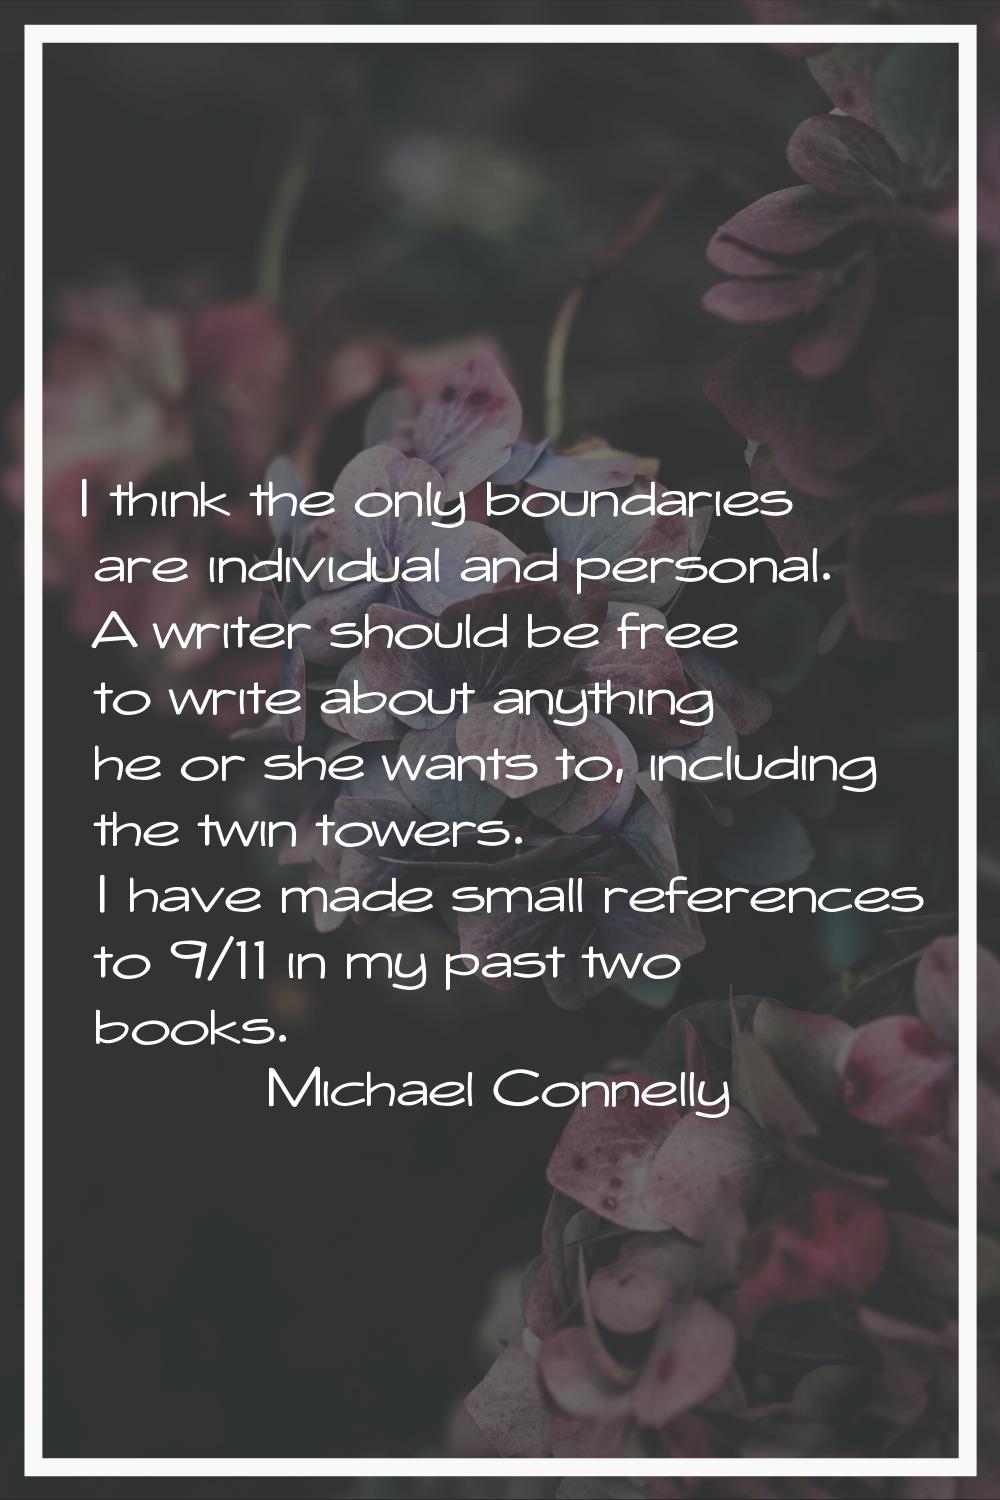 I think the only boundaries are individual and personal. A writer should be free to write about any